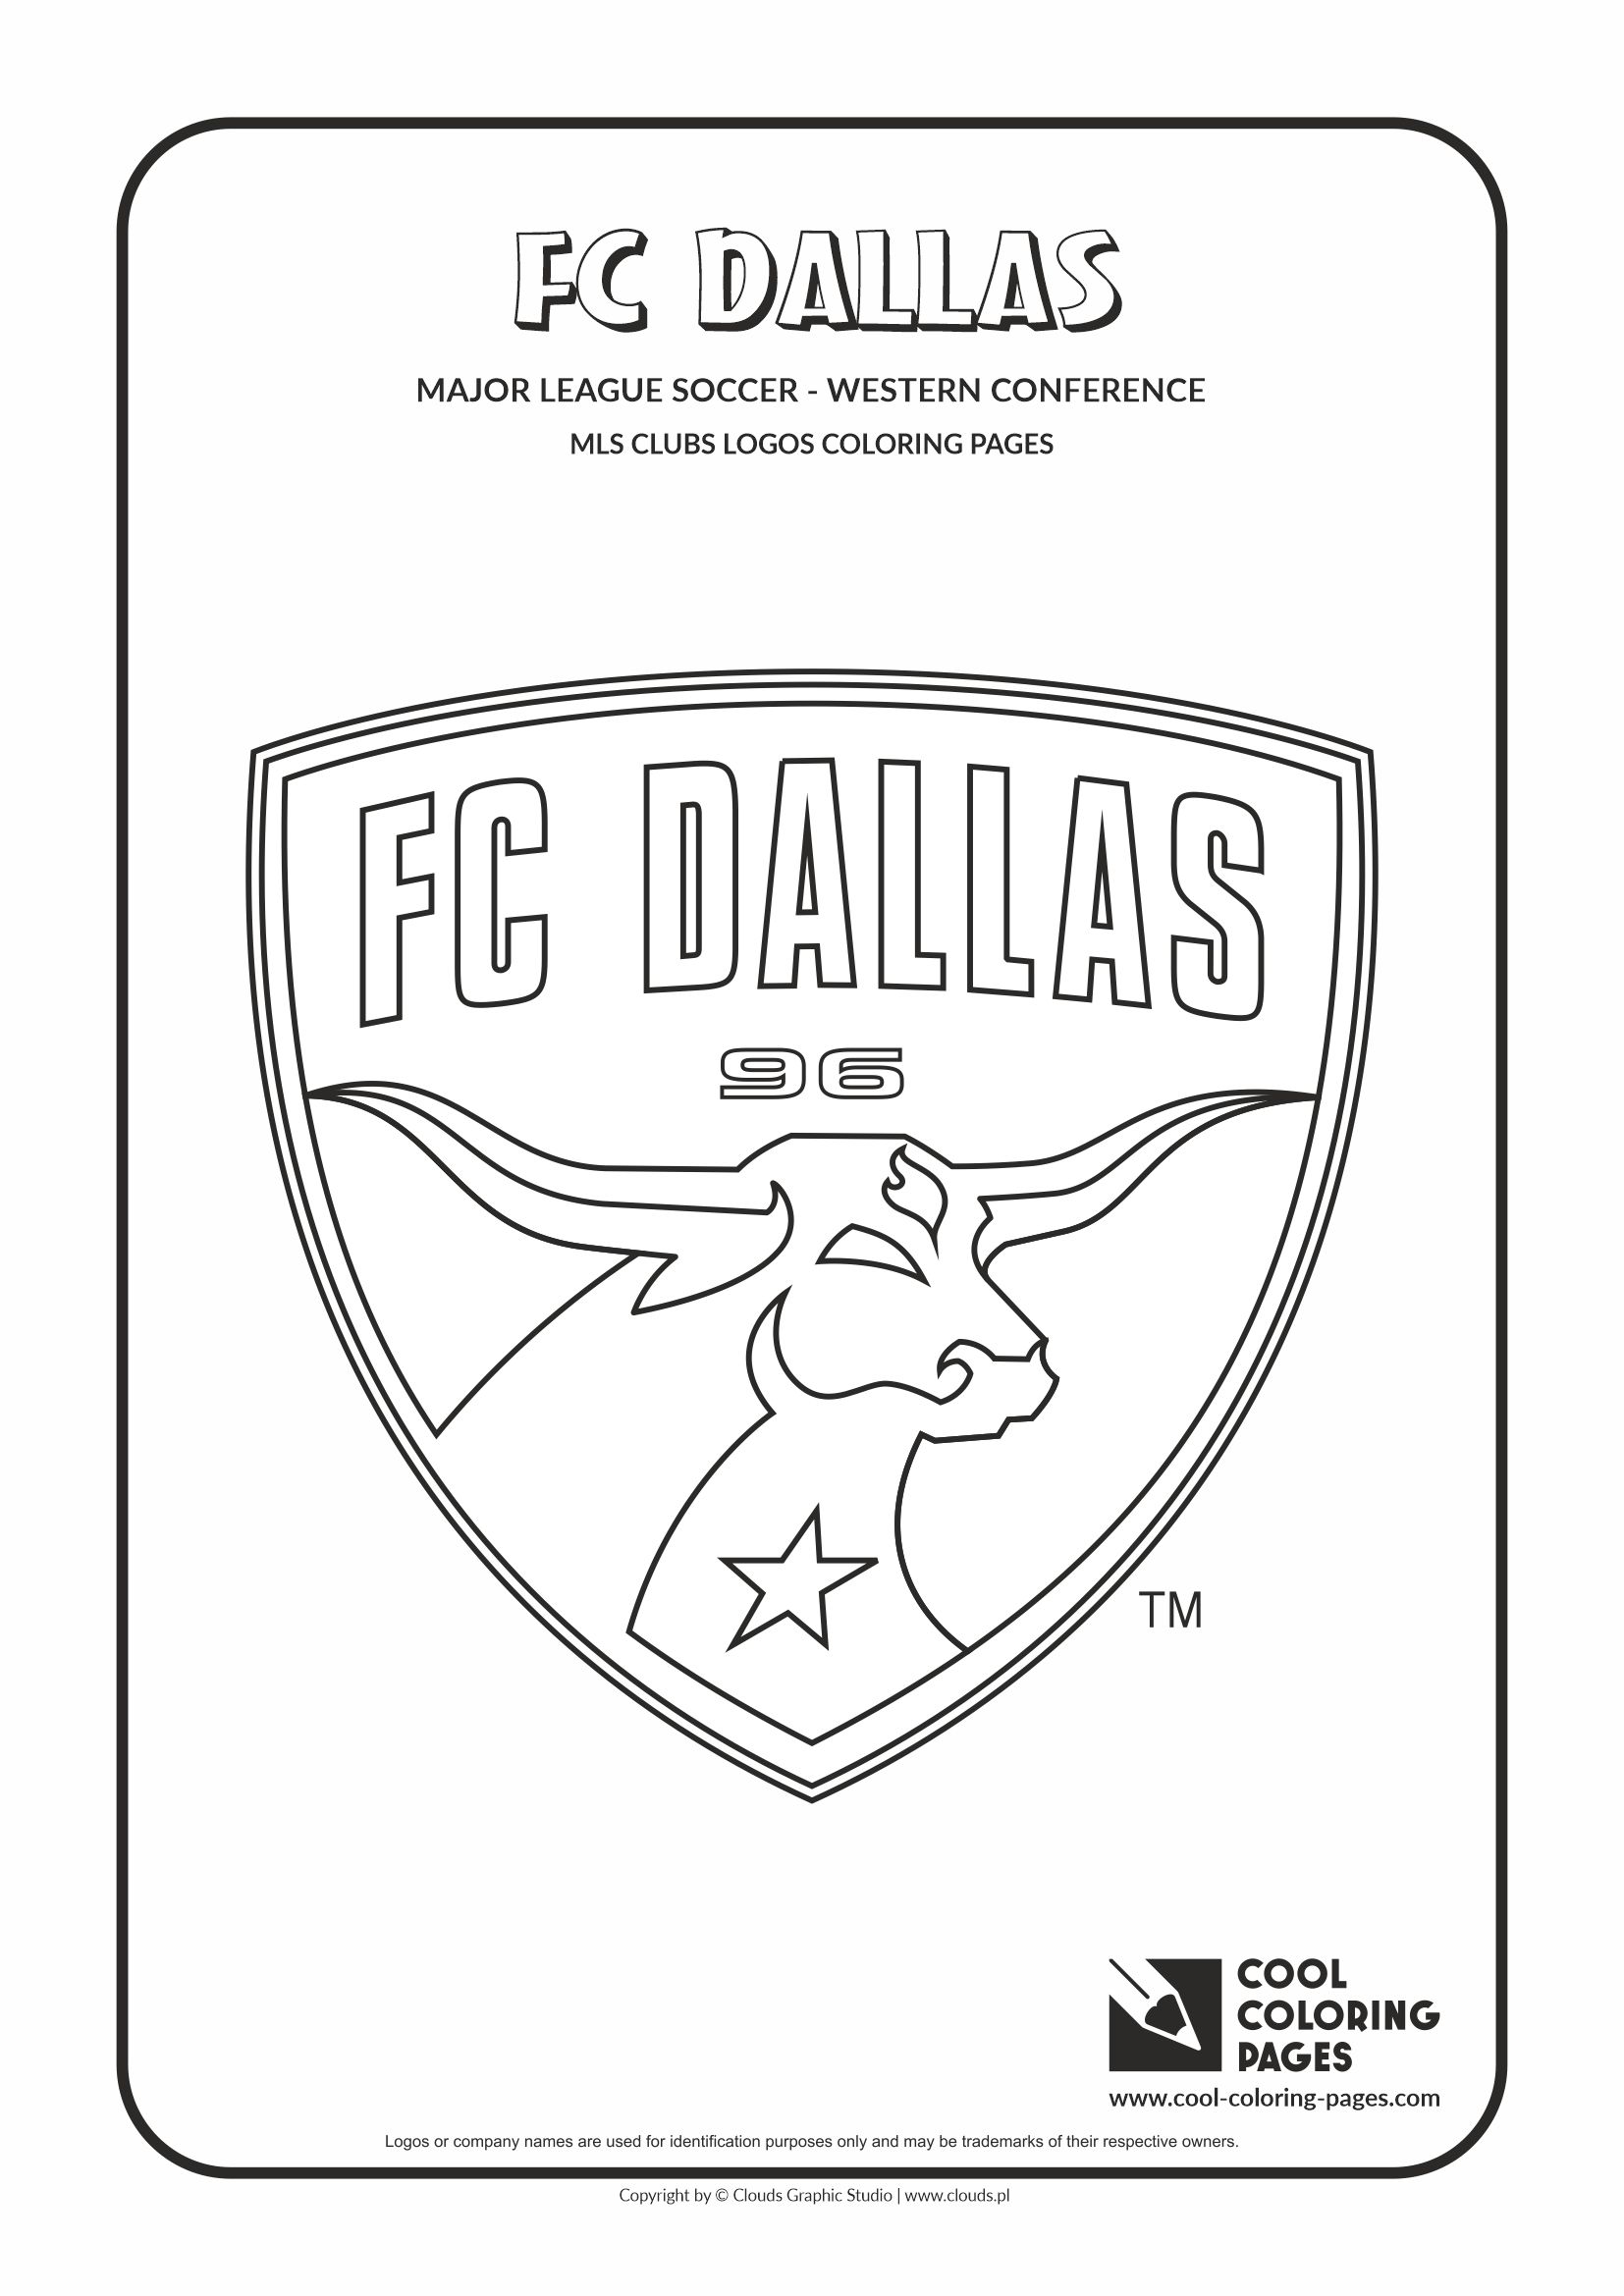 Cool Coloring Pages - MLS Clubs logos - FC Dallas